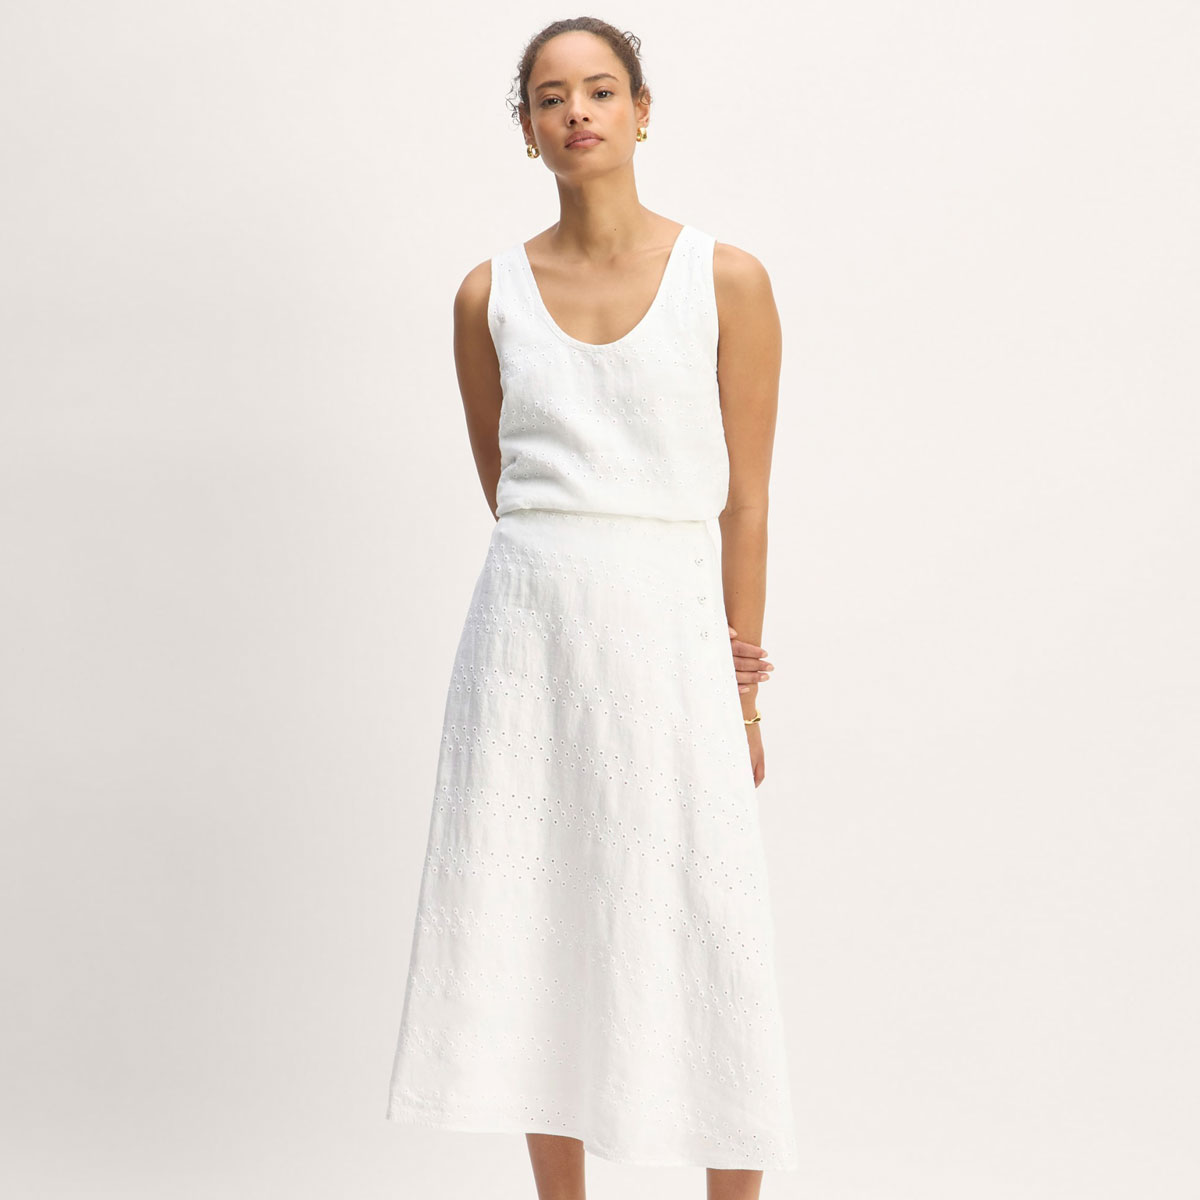 Everlane's Best-Selling Linen Pieces Are All 25% Off Right Now—Shop My Picks